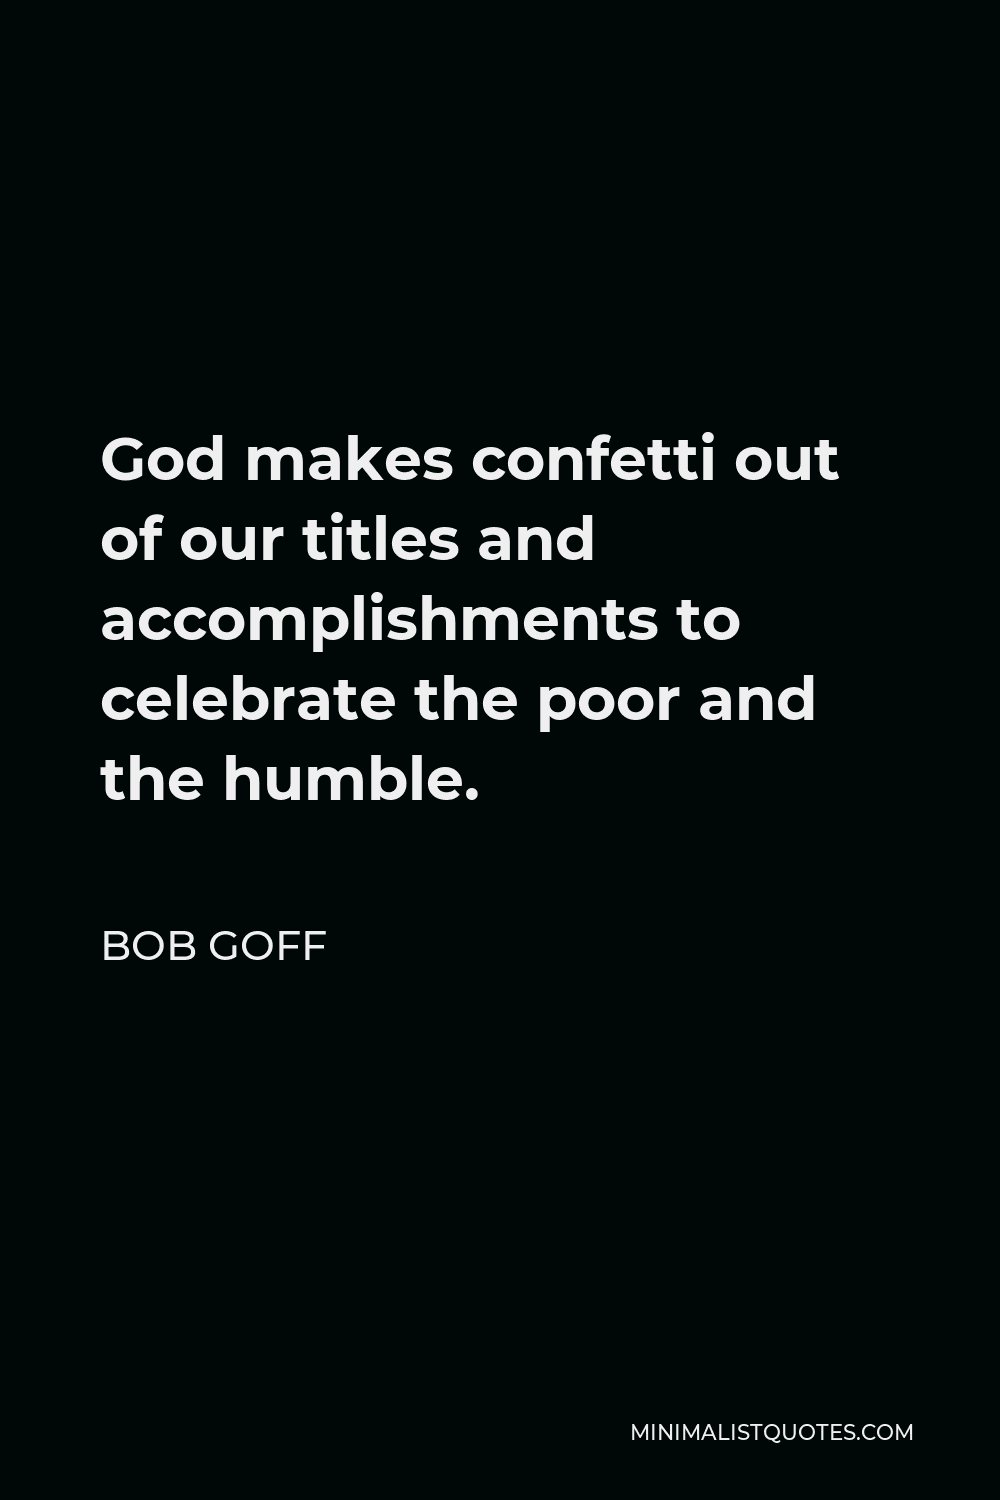 Bob Goff Quote - God makes confetti out of our titles and accomplishments to celebrate the poor and the humble.